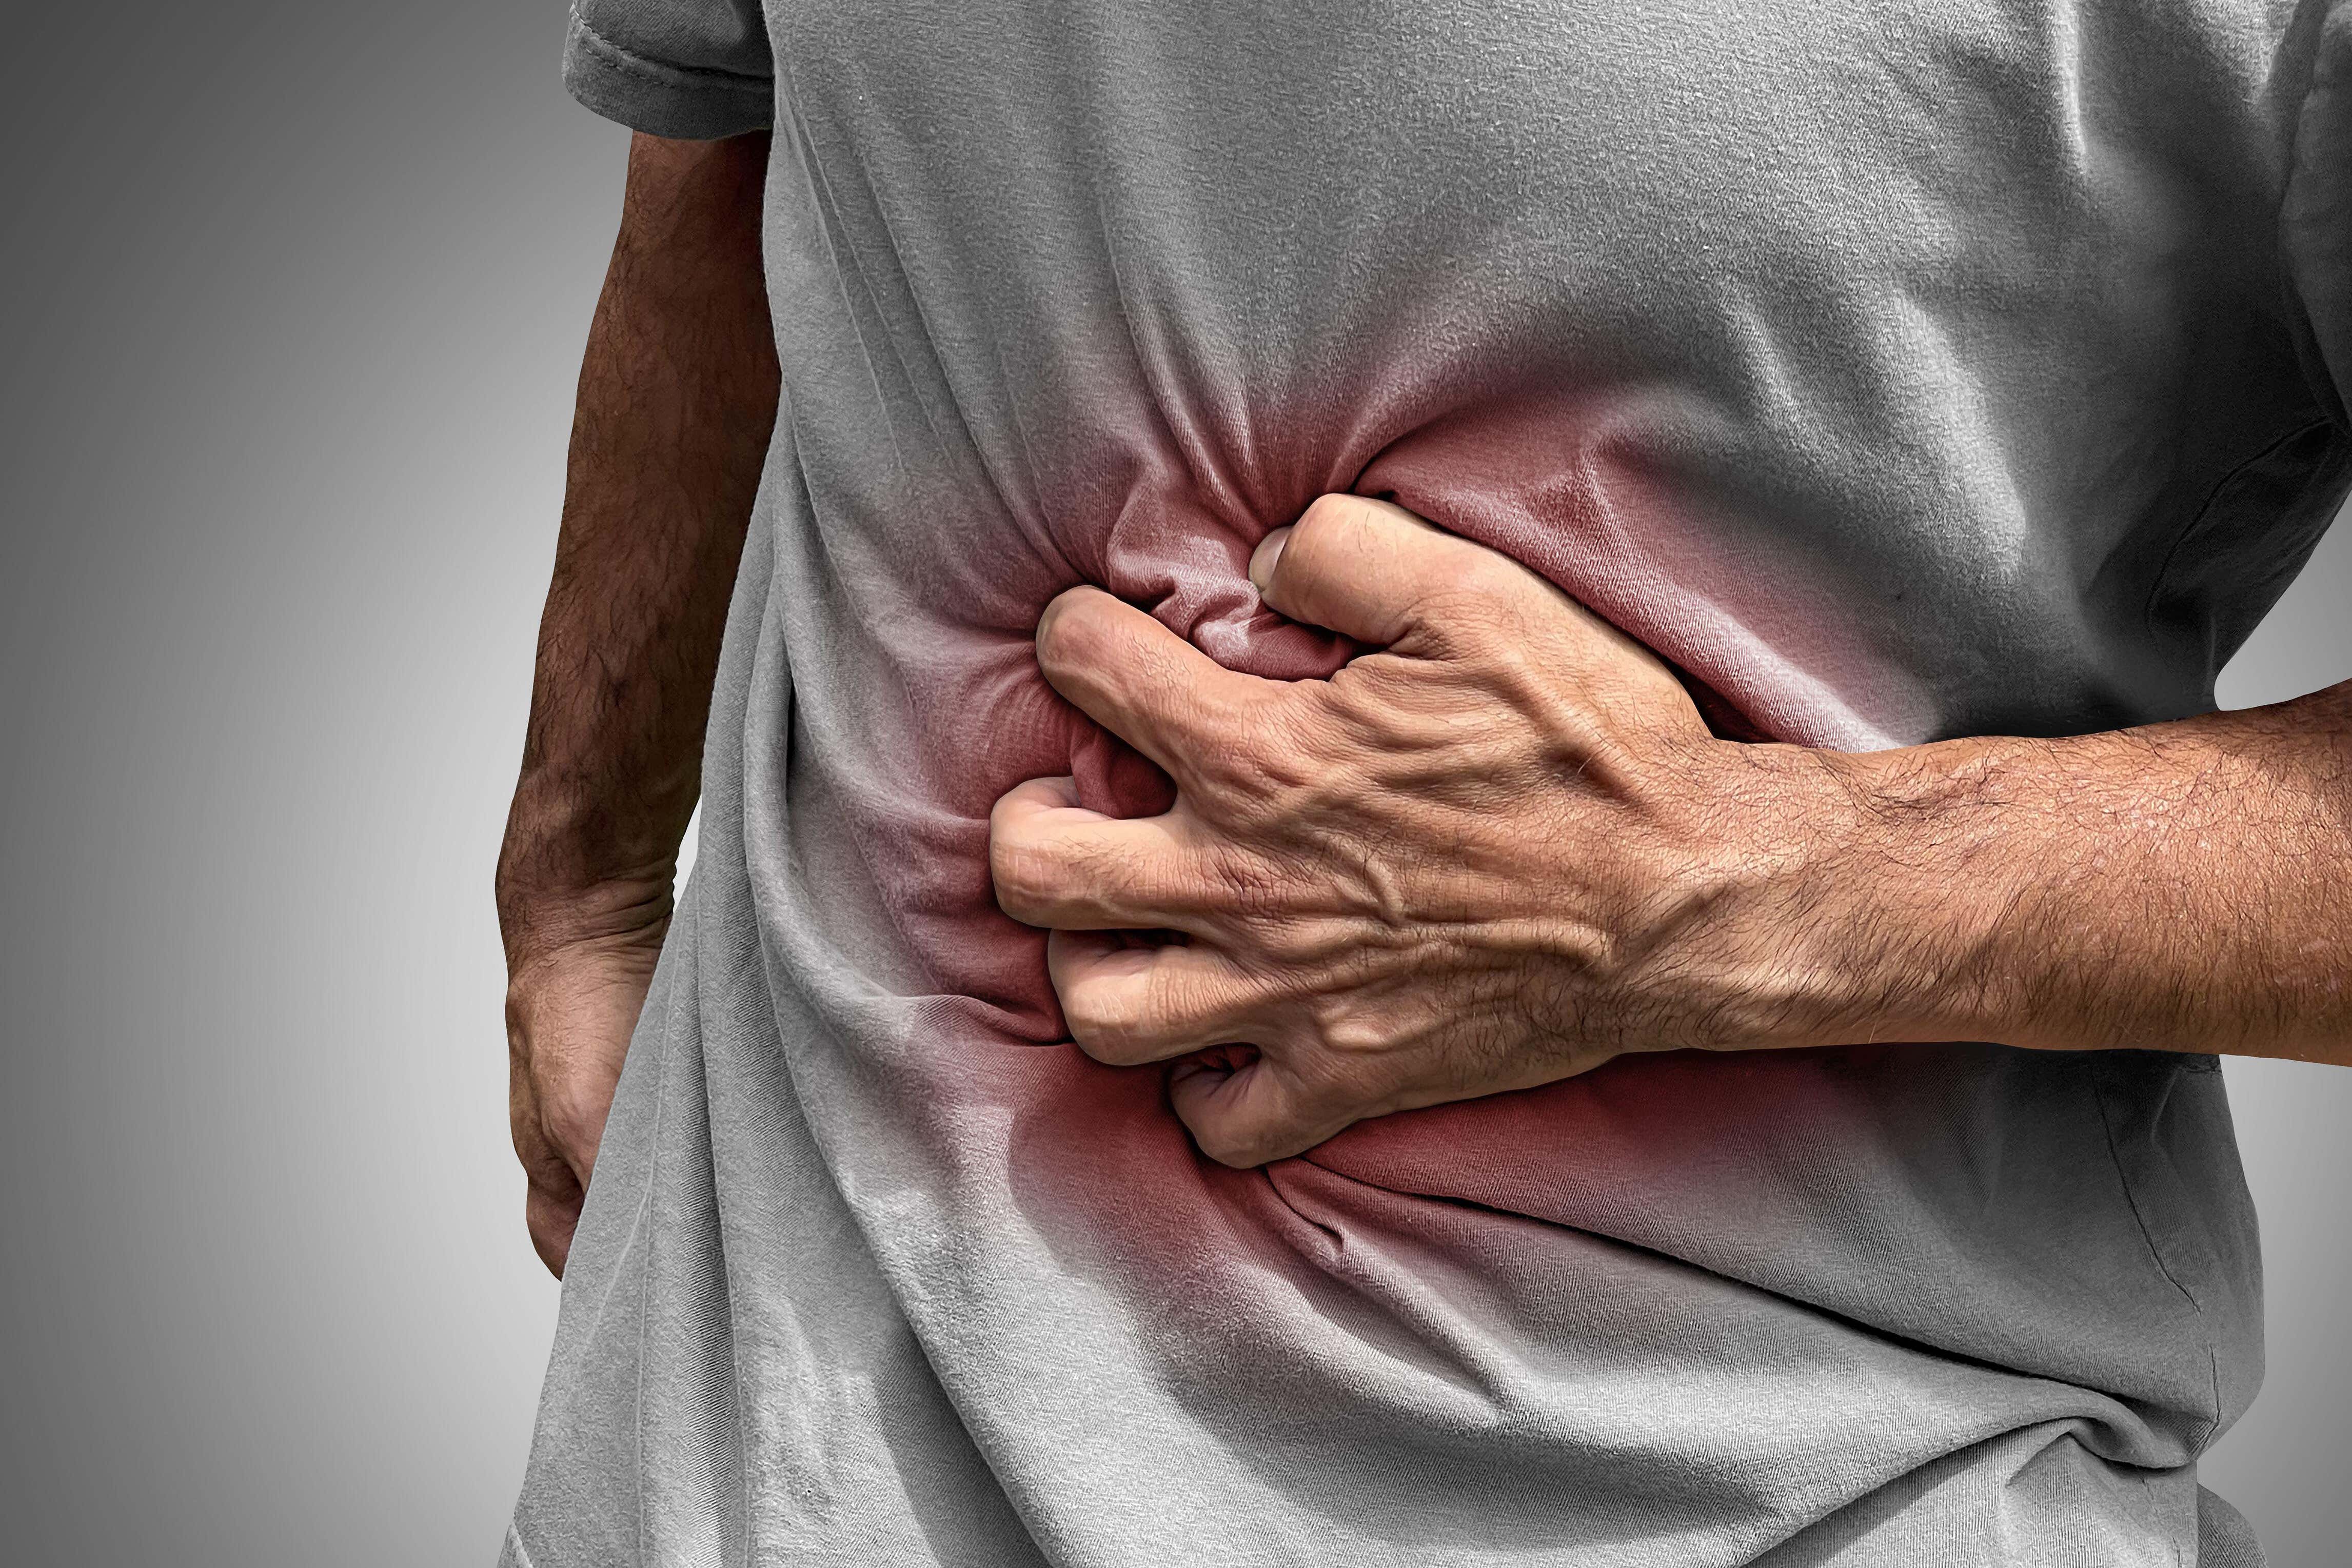 Crohn’s disease and colitis sufferers can experience severe stomach or bowel pain and have to be careful what food they eat